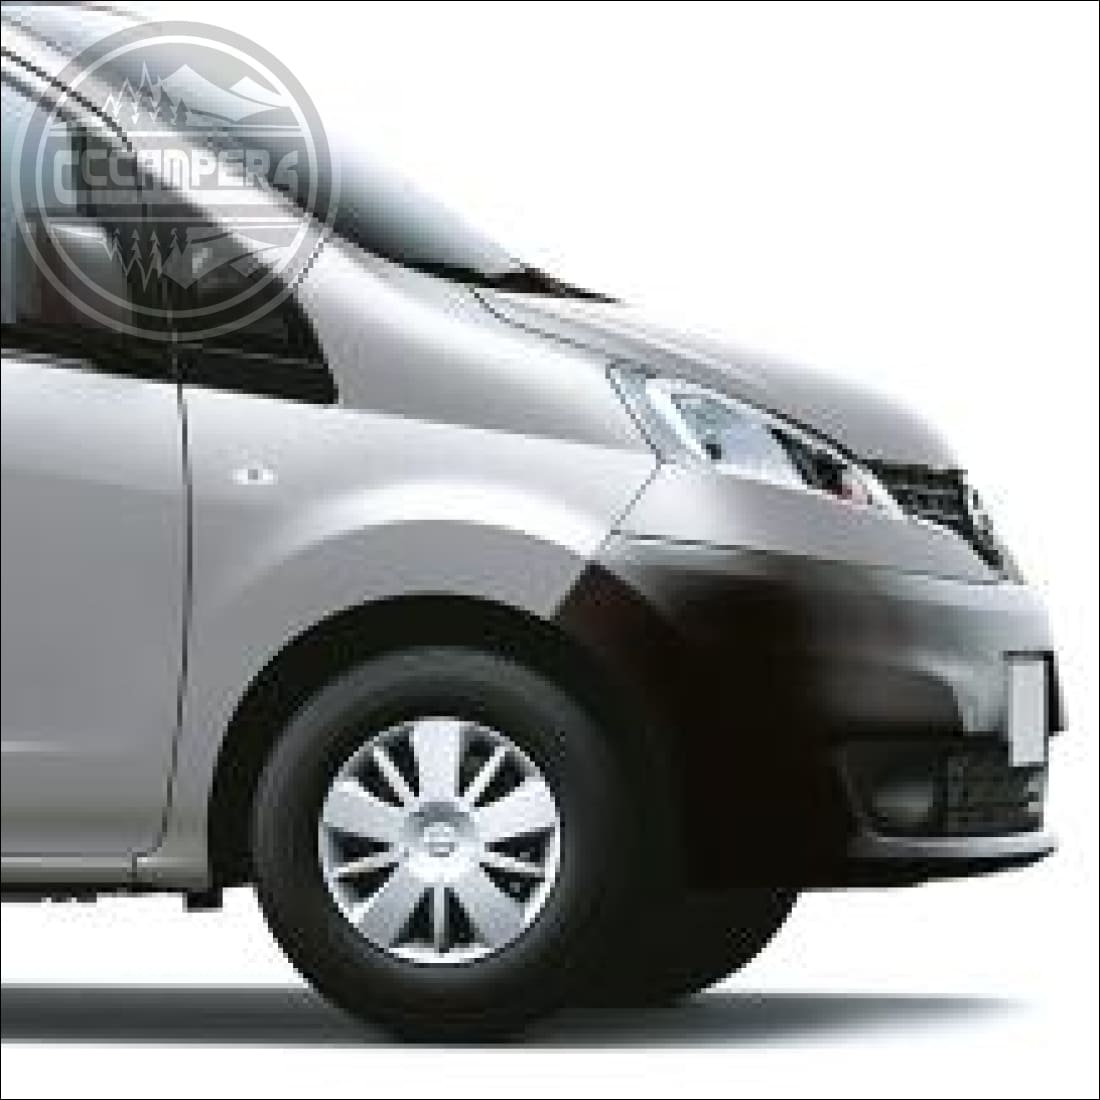 Colour Code Your Pop Up Roof Nissan NV200 2010+ - cccampers.myshopify.com